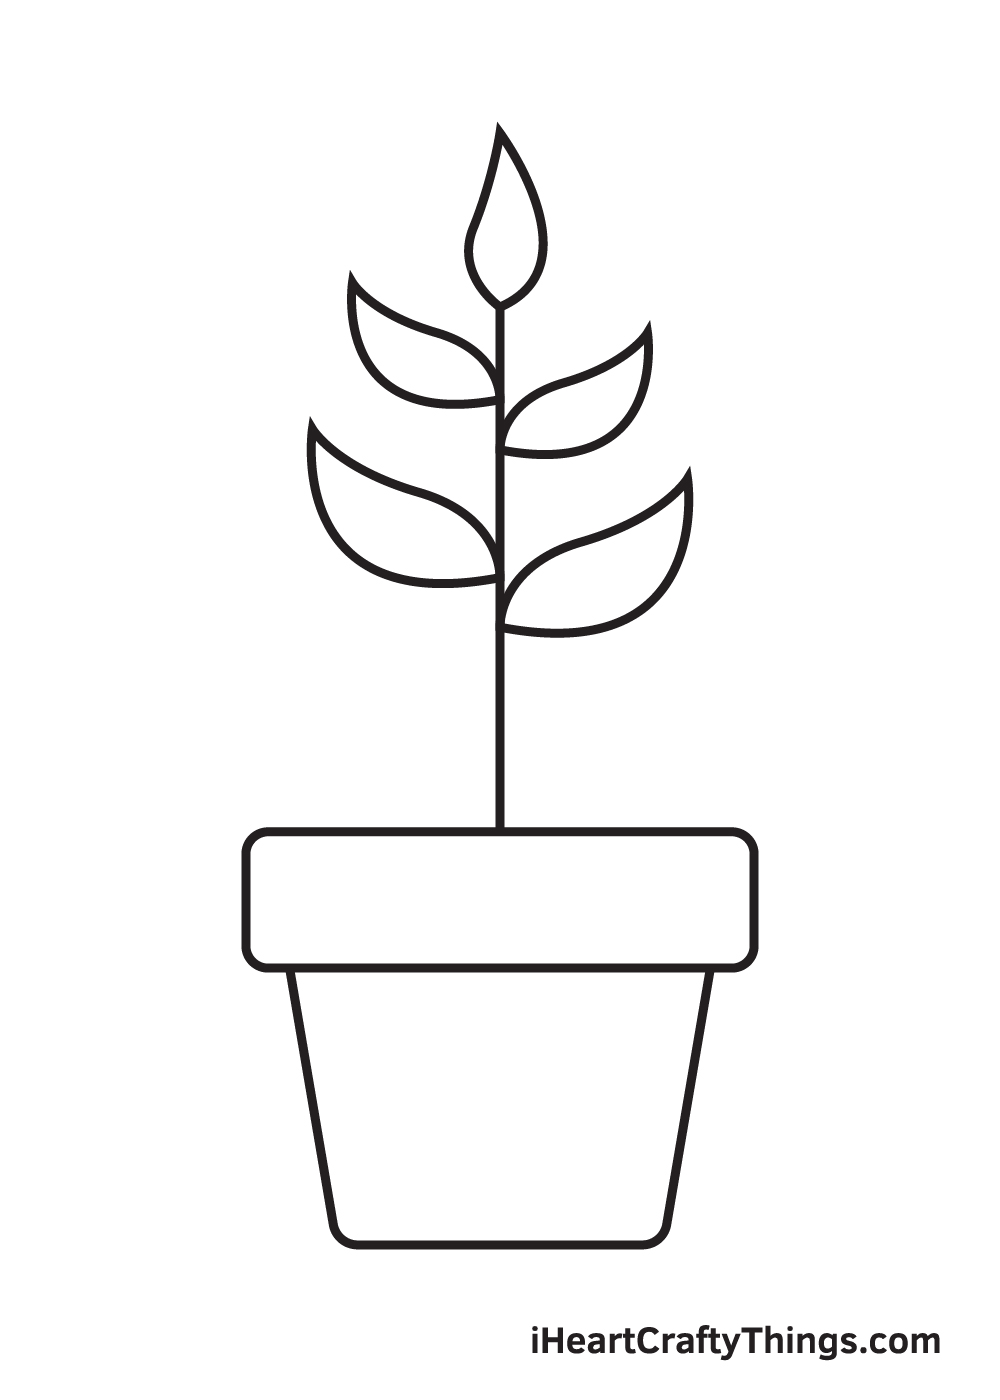 Plant drawing - Step 7